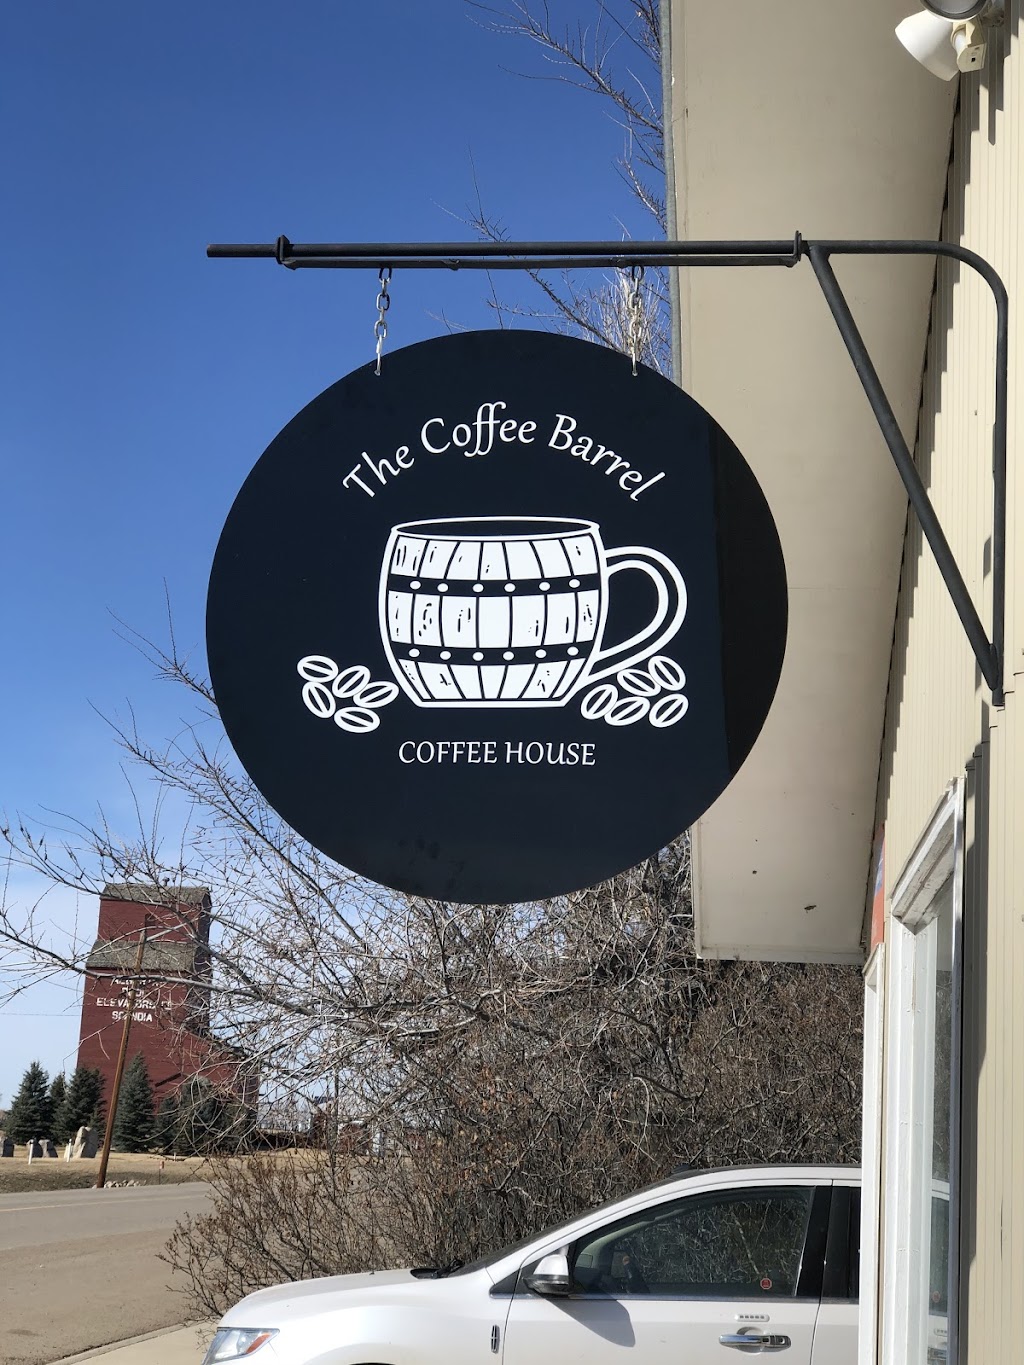 The Coffee Barrel | cafe | 109 Railway Ave, Scandia, AB T0J 2Z0, Canada | 4039793093 OR +1 403-979-3093